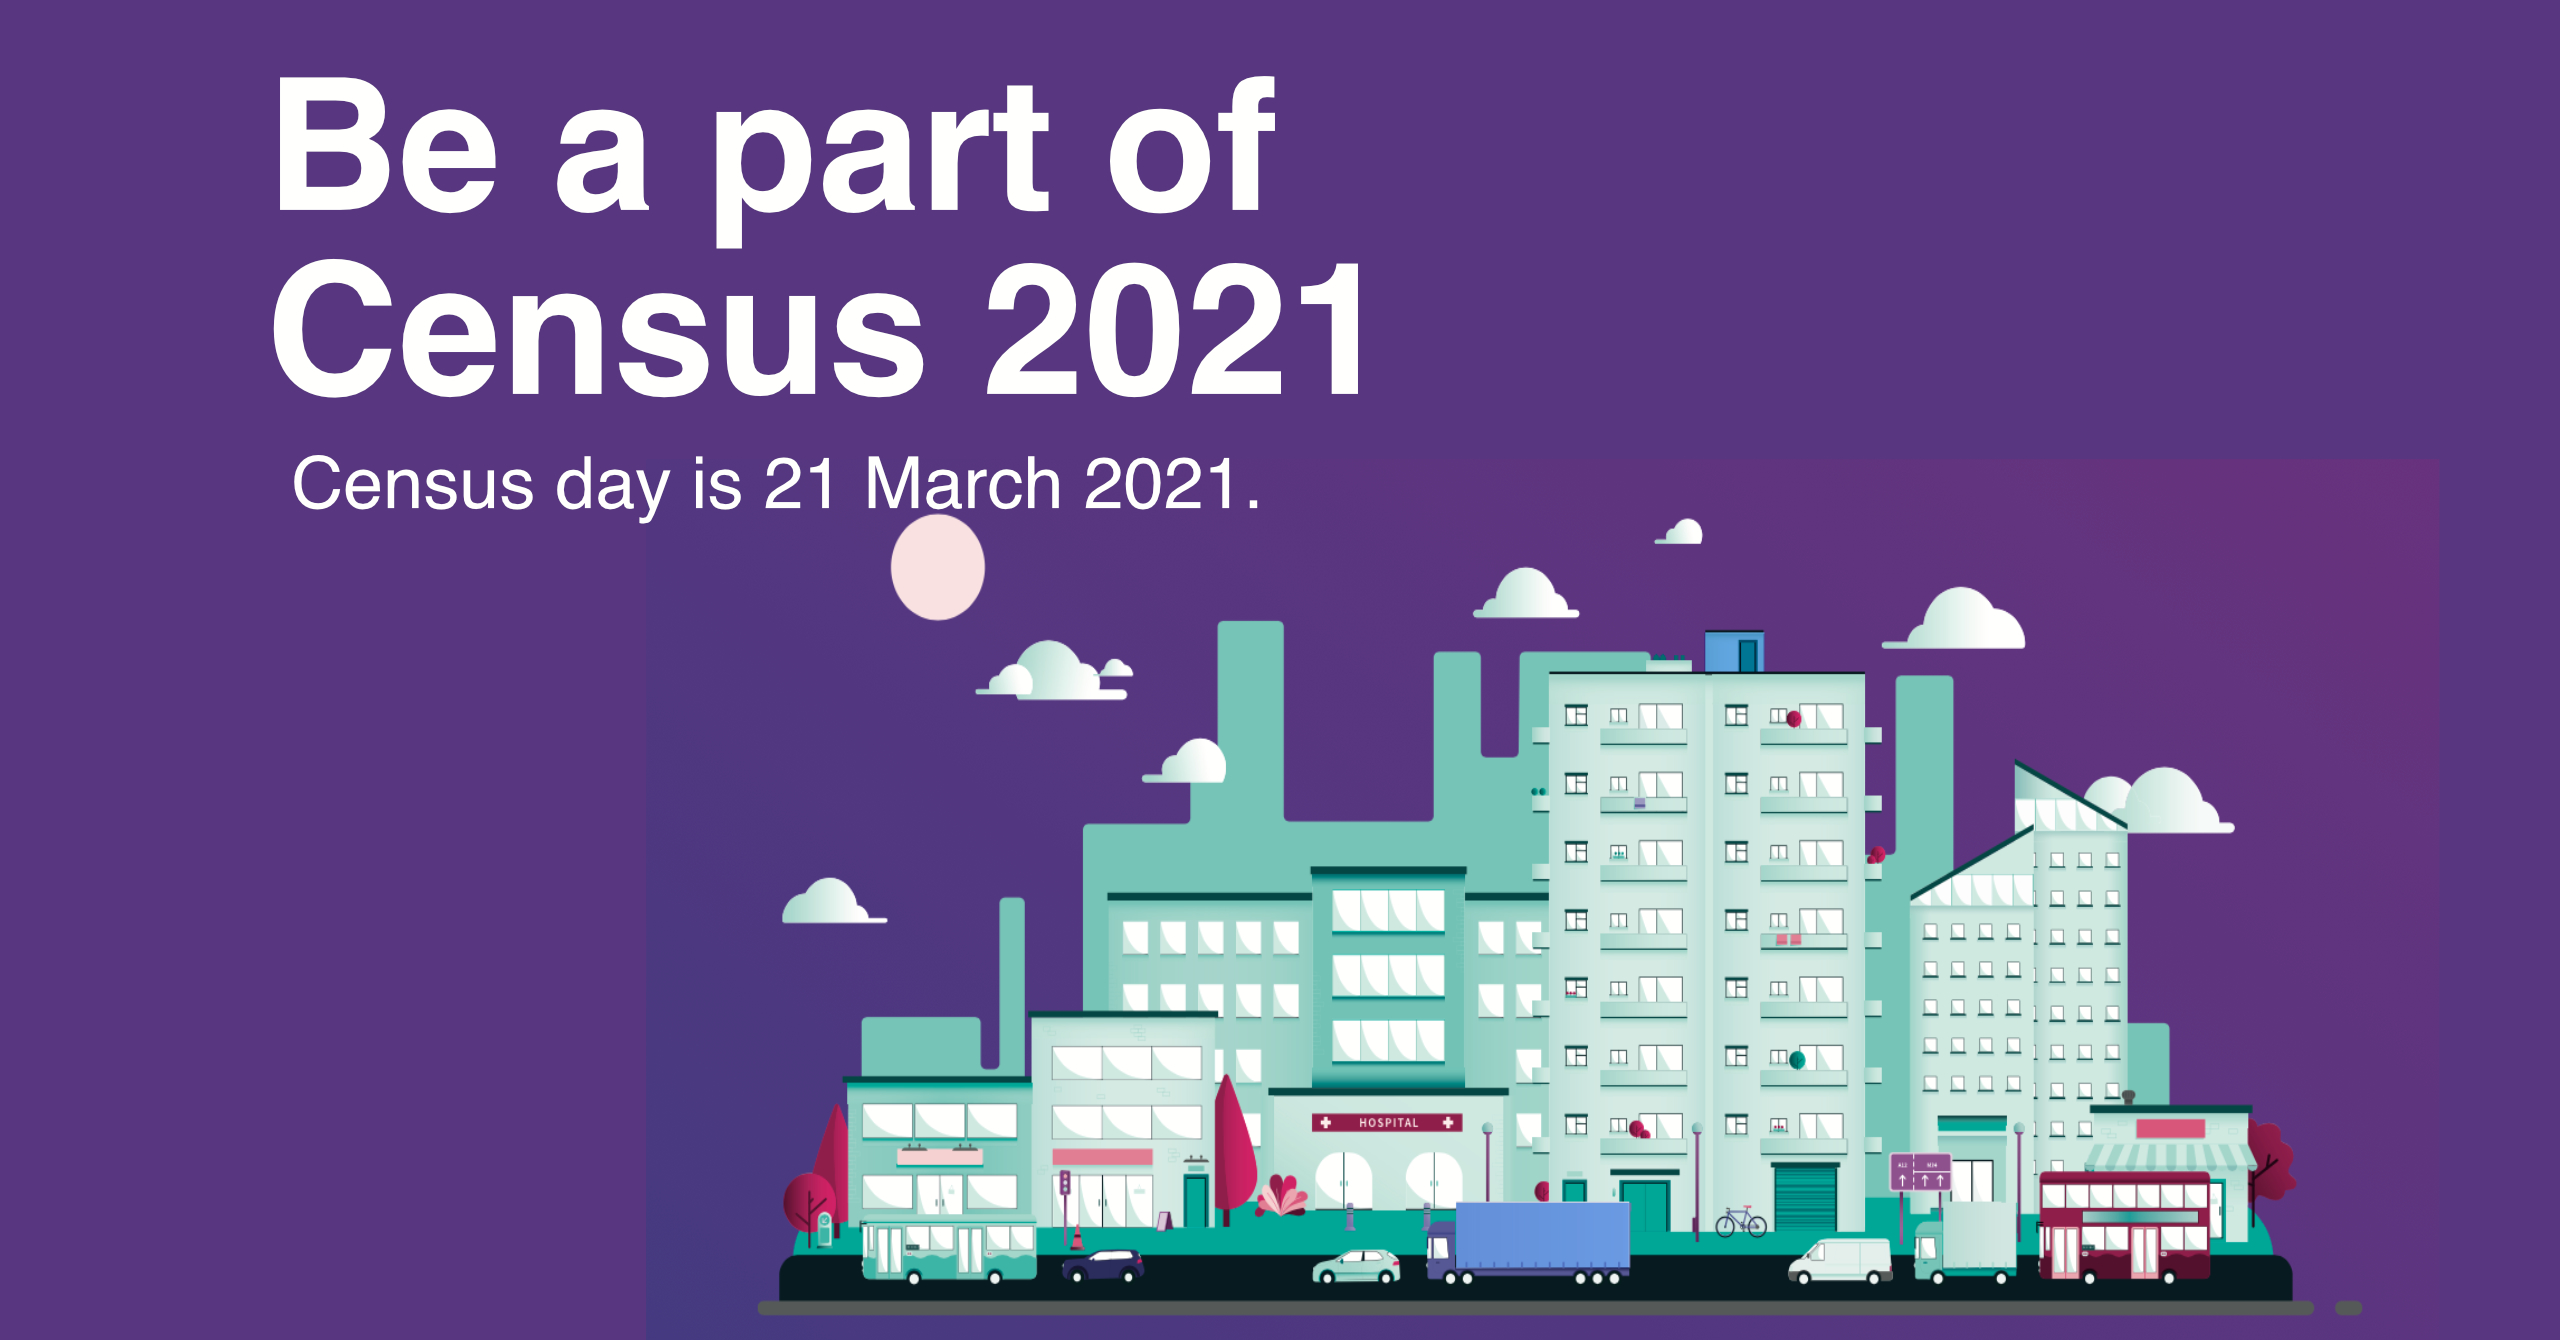 Be a part of Census 2021